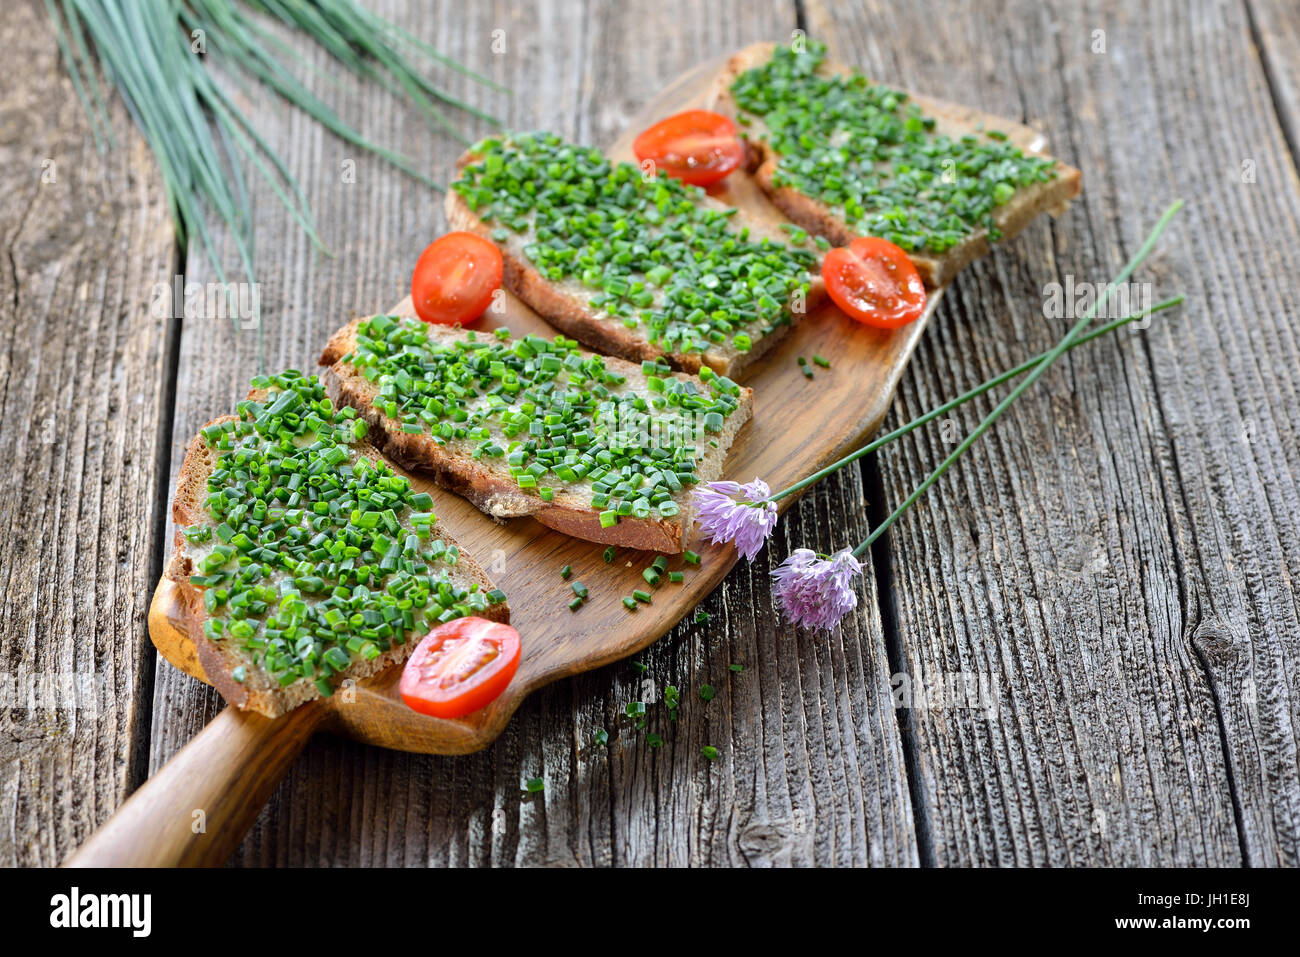 Beer garden food: Slices of fresh farmhouse bread with butter and chopped chives on a wooden board Stock Photo